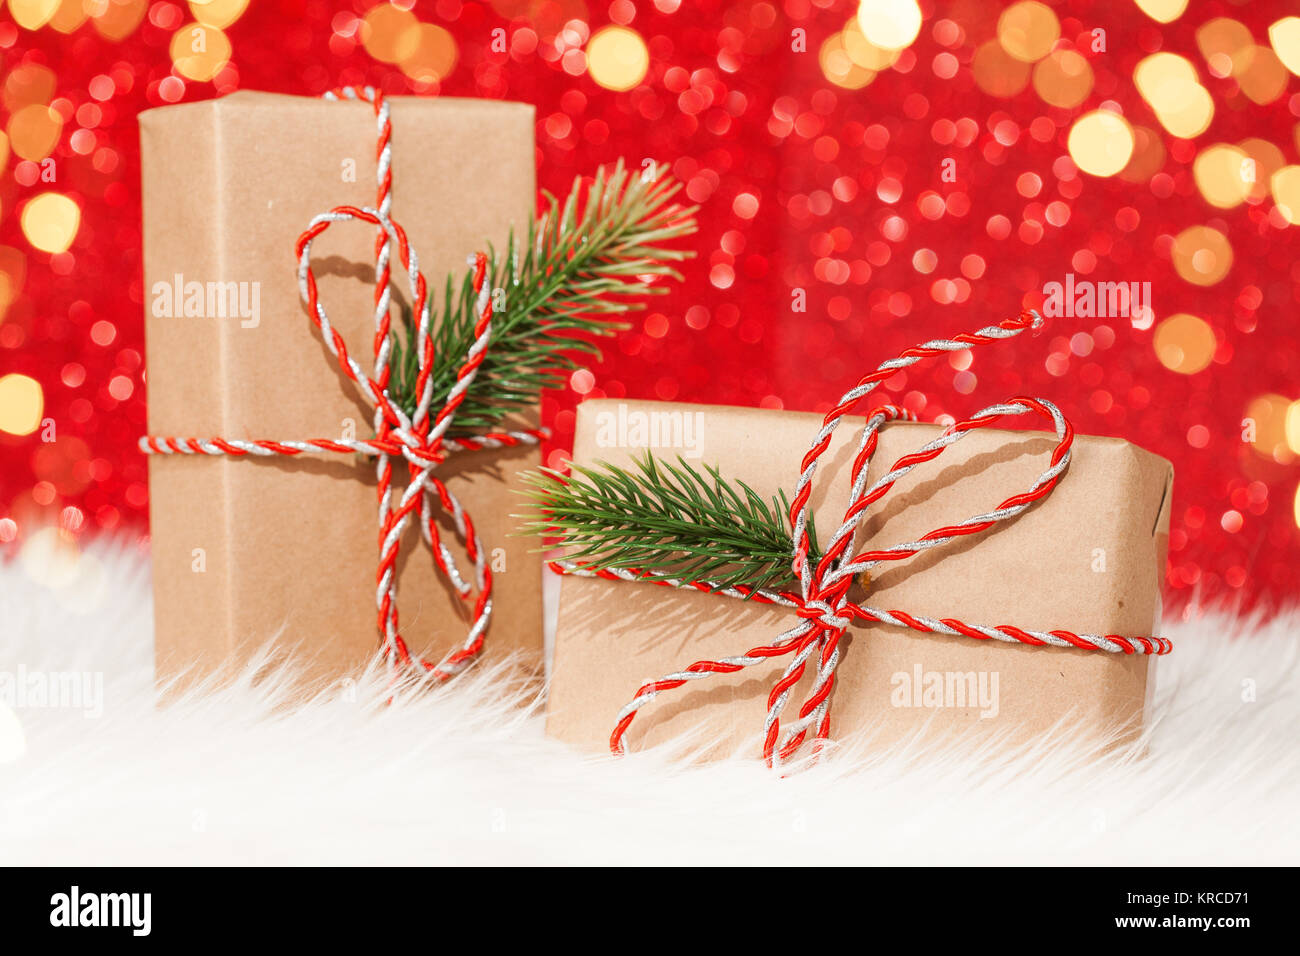 Christmas vintage presents on red background Stock Photo